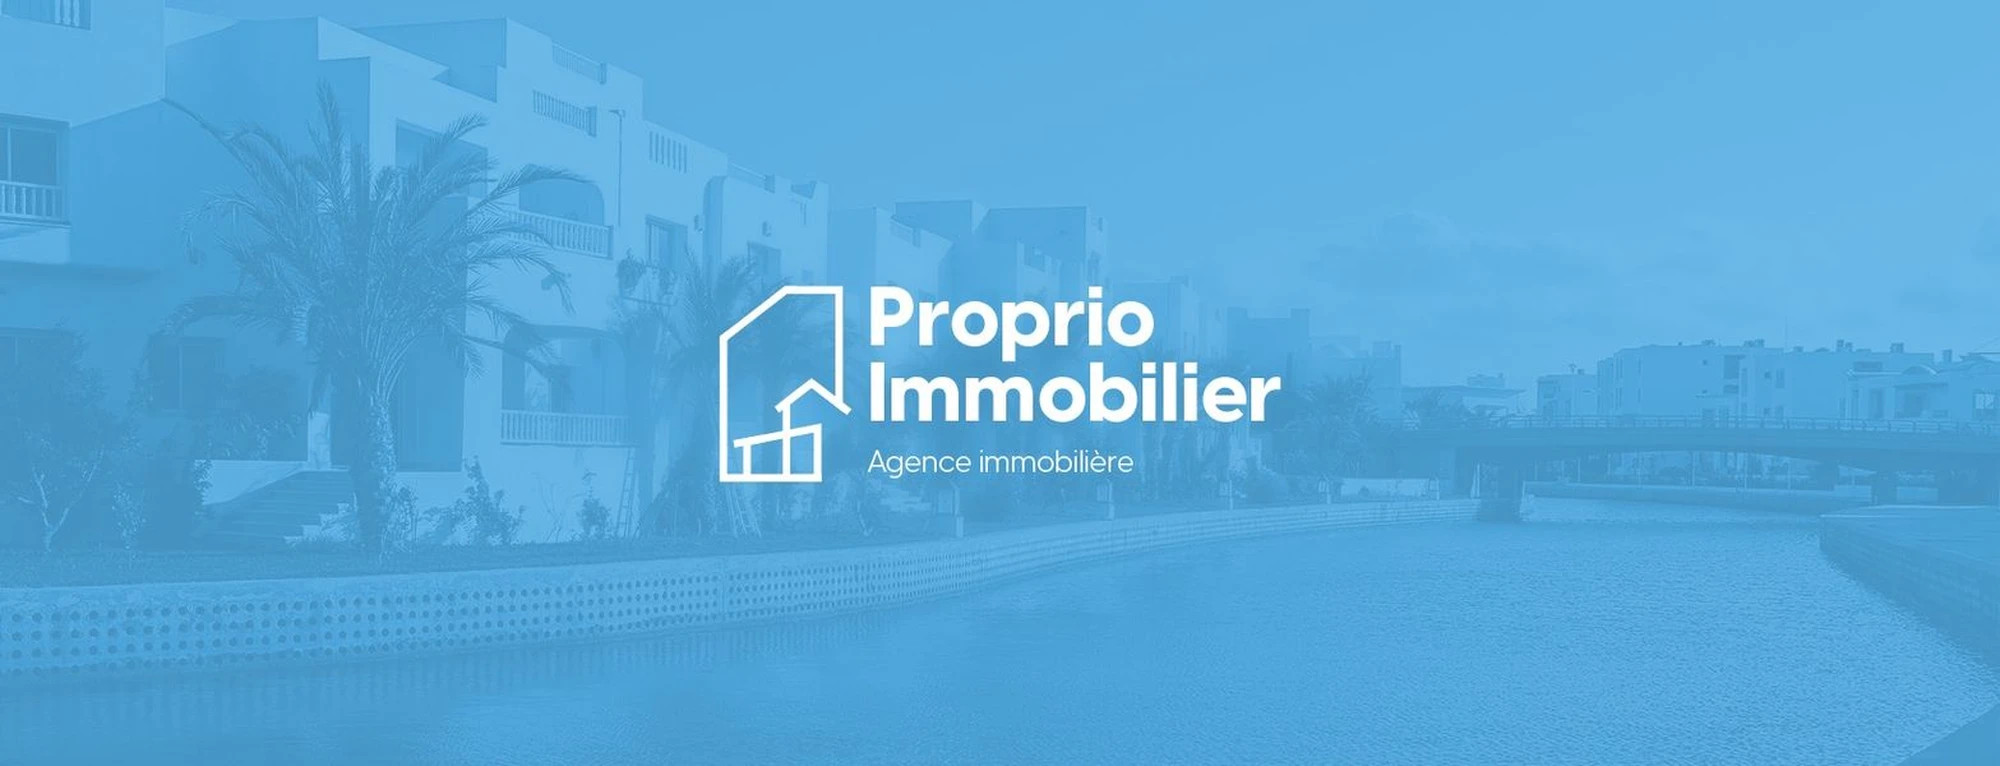 tayara shop cover of Proprio Immobilier